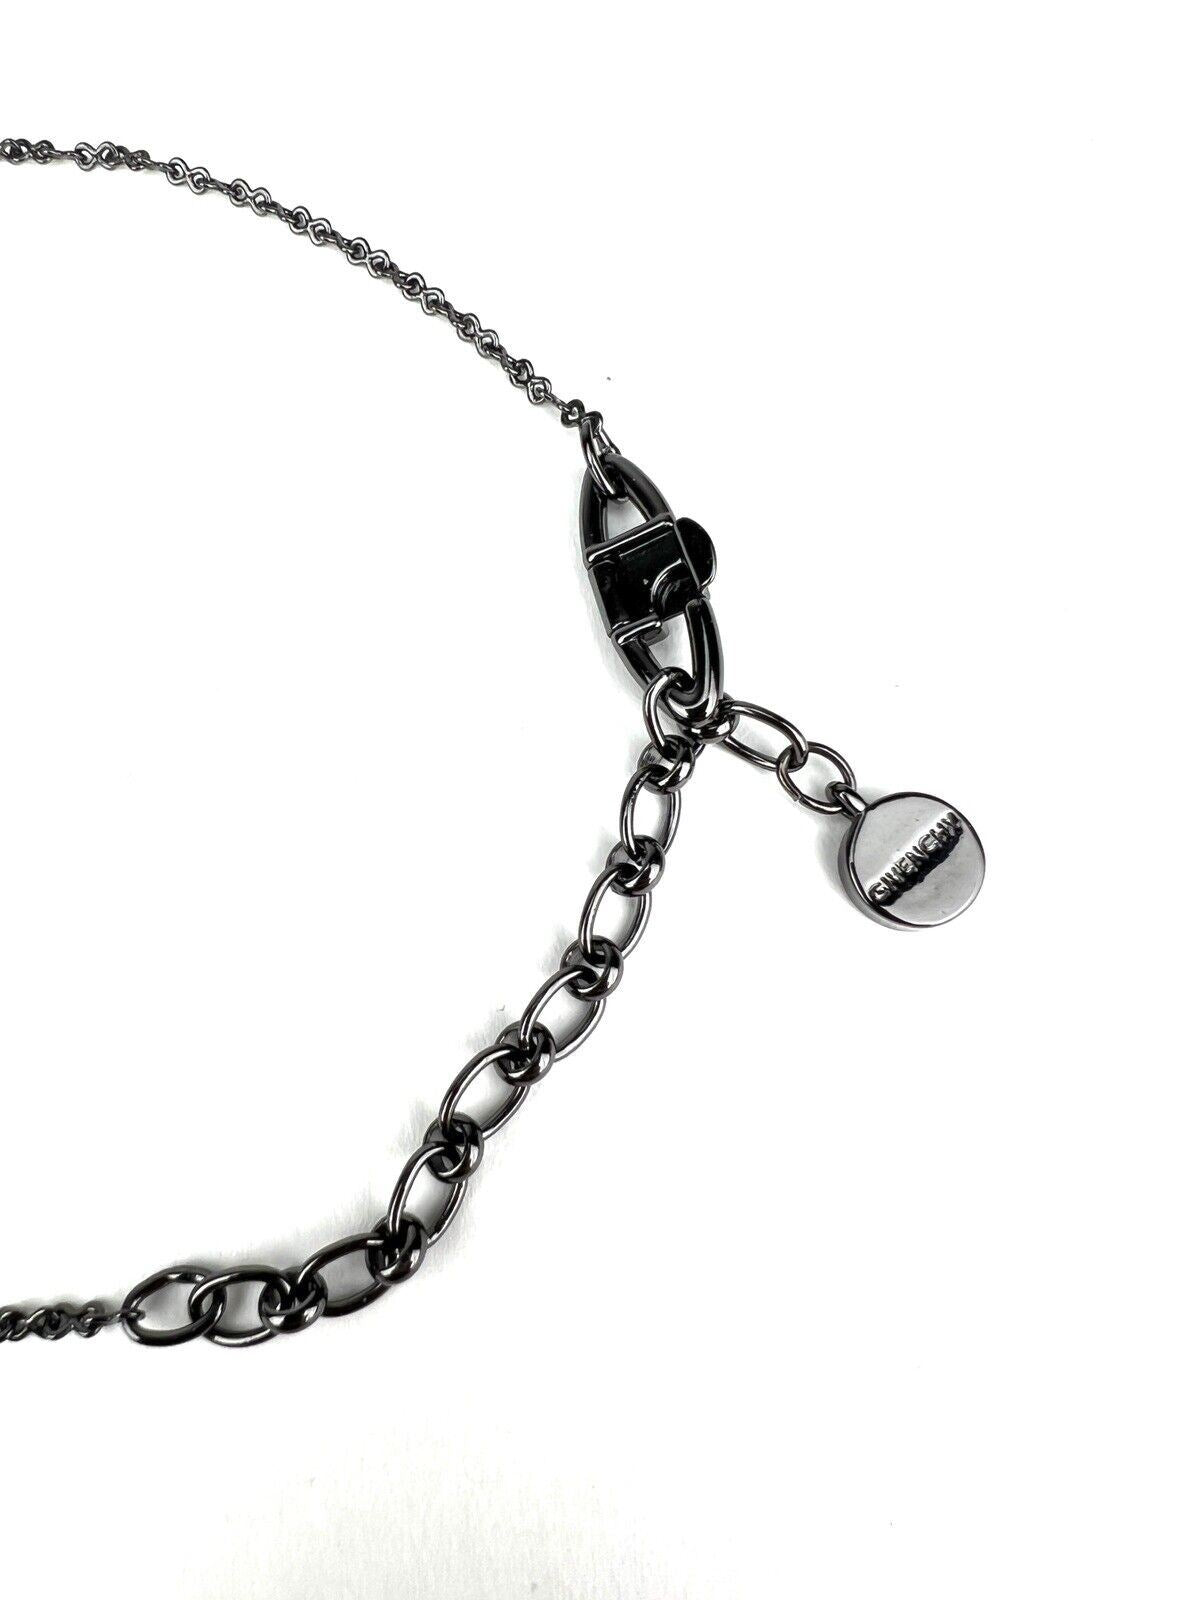 GIVENCHY Gunmetal Gray Chain Black Crystal Y Drop Pendant Necklace w/ Extender